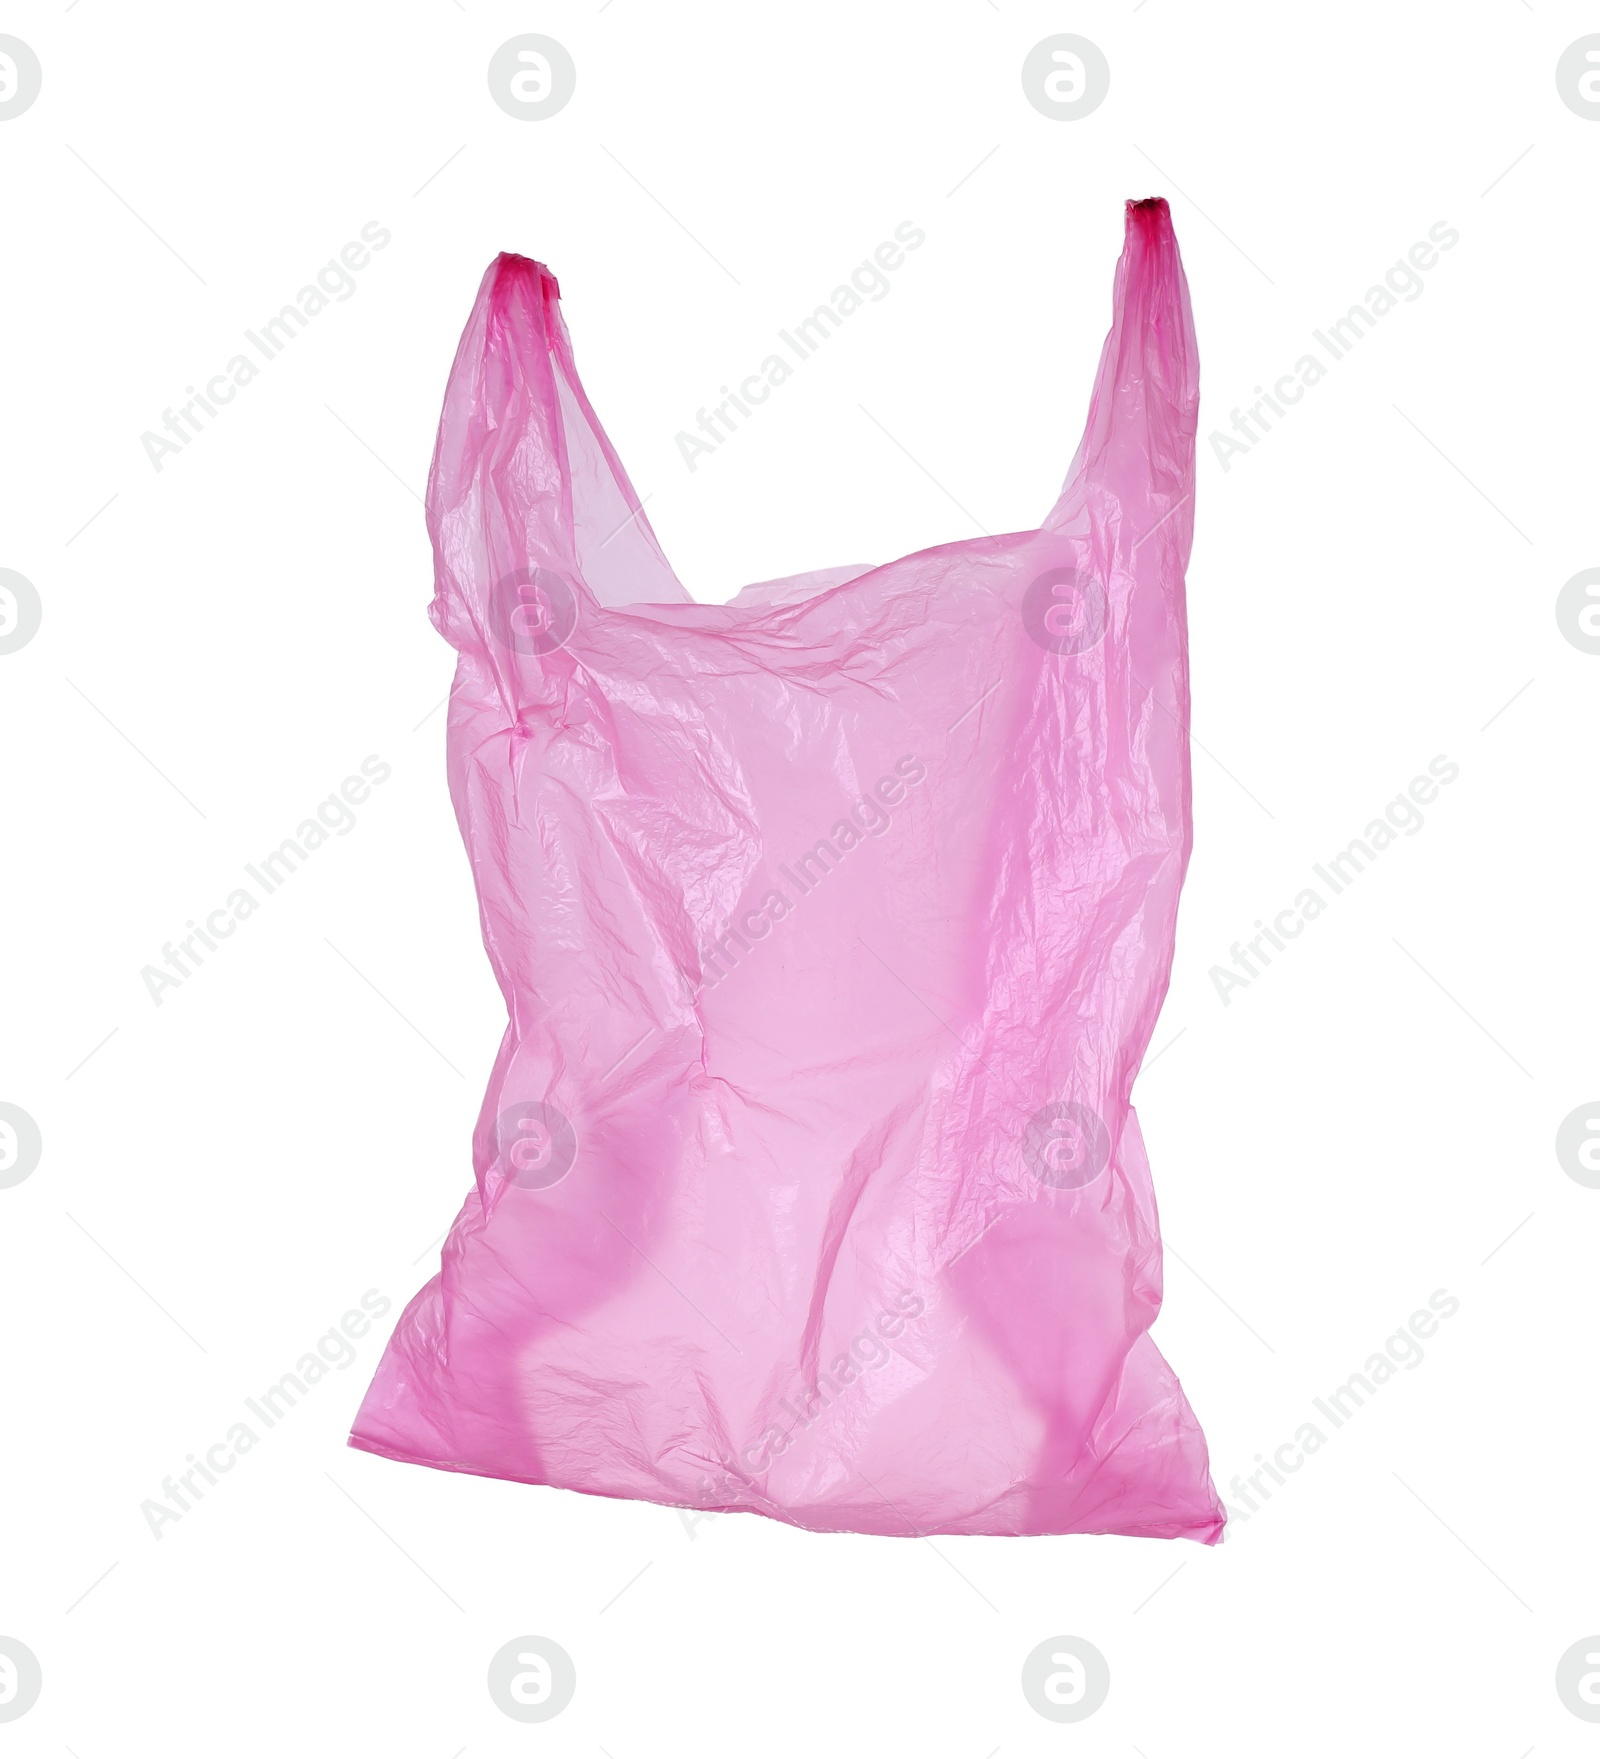 Photo of One pink plastic bag isolated on white